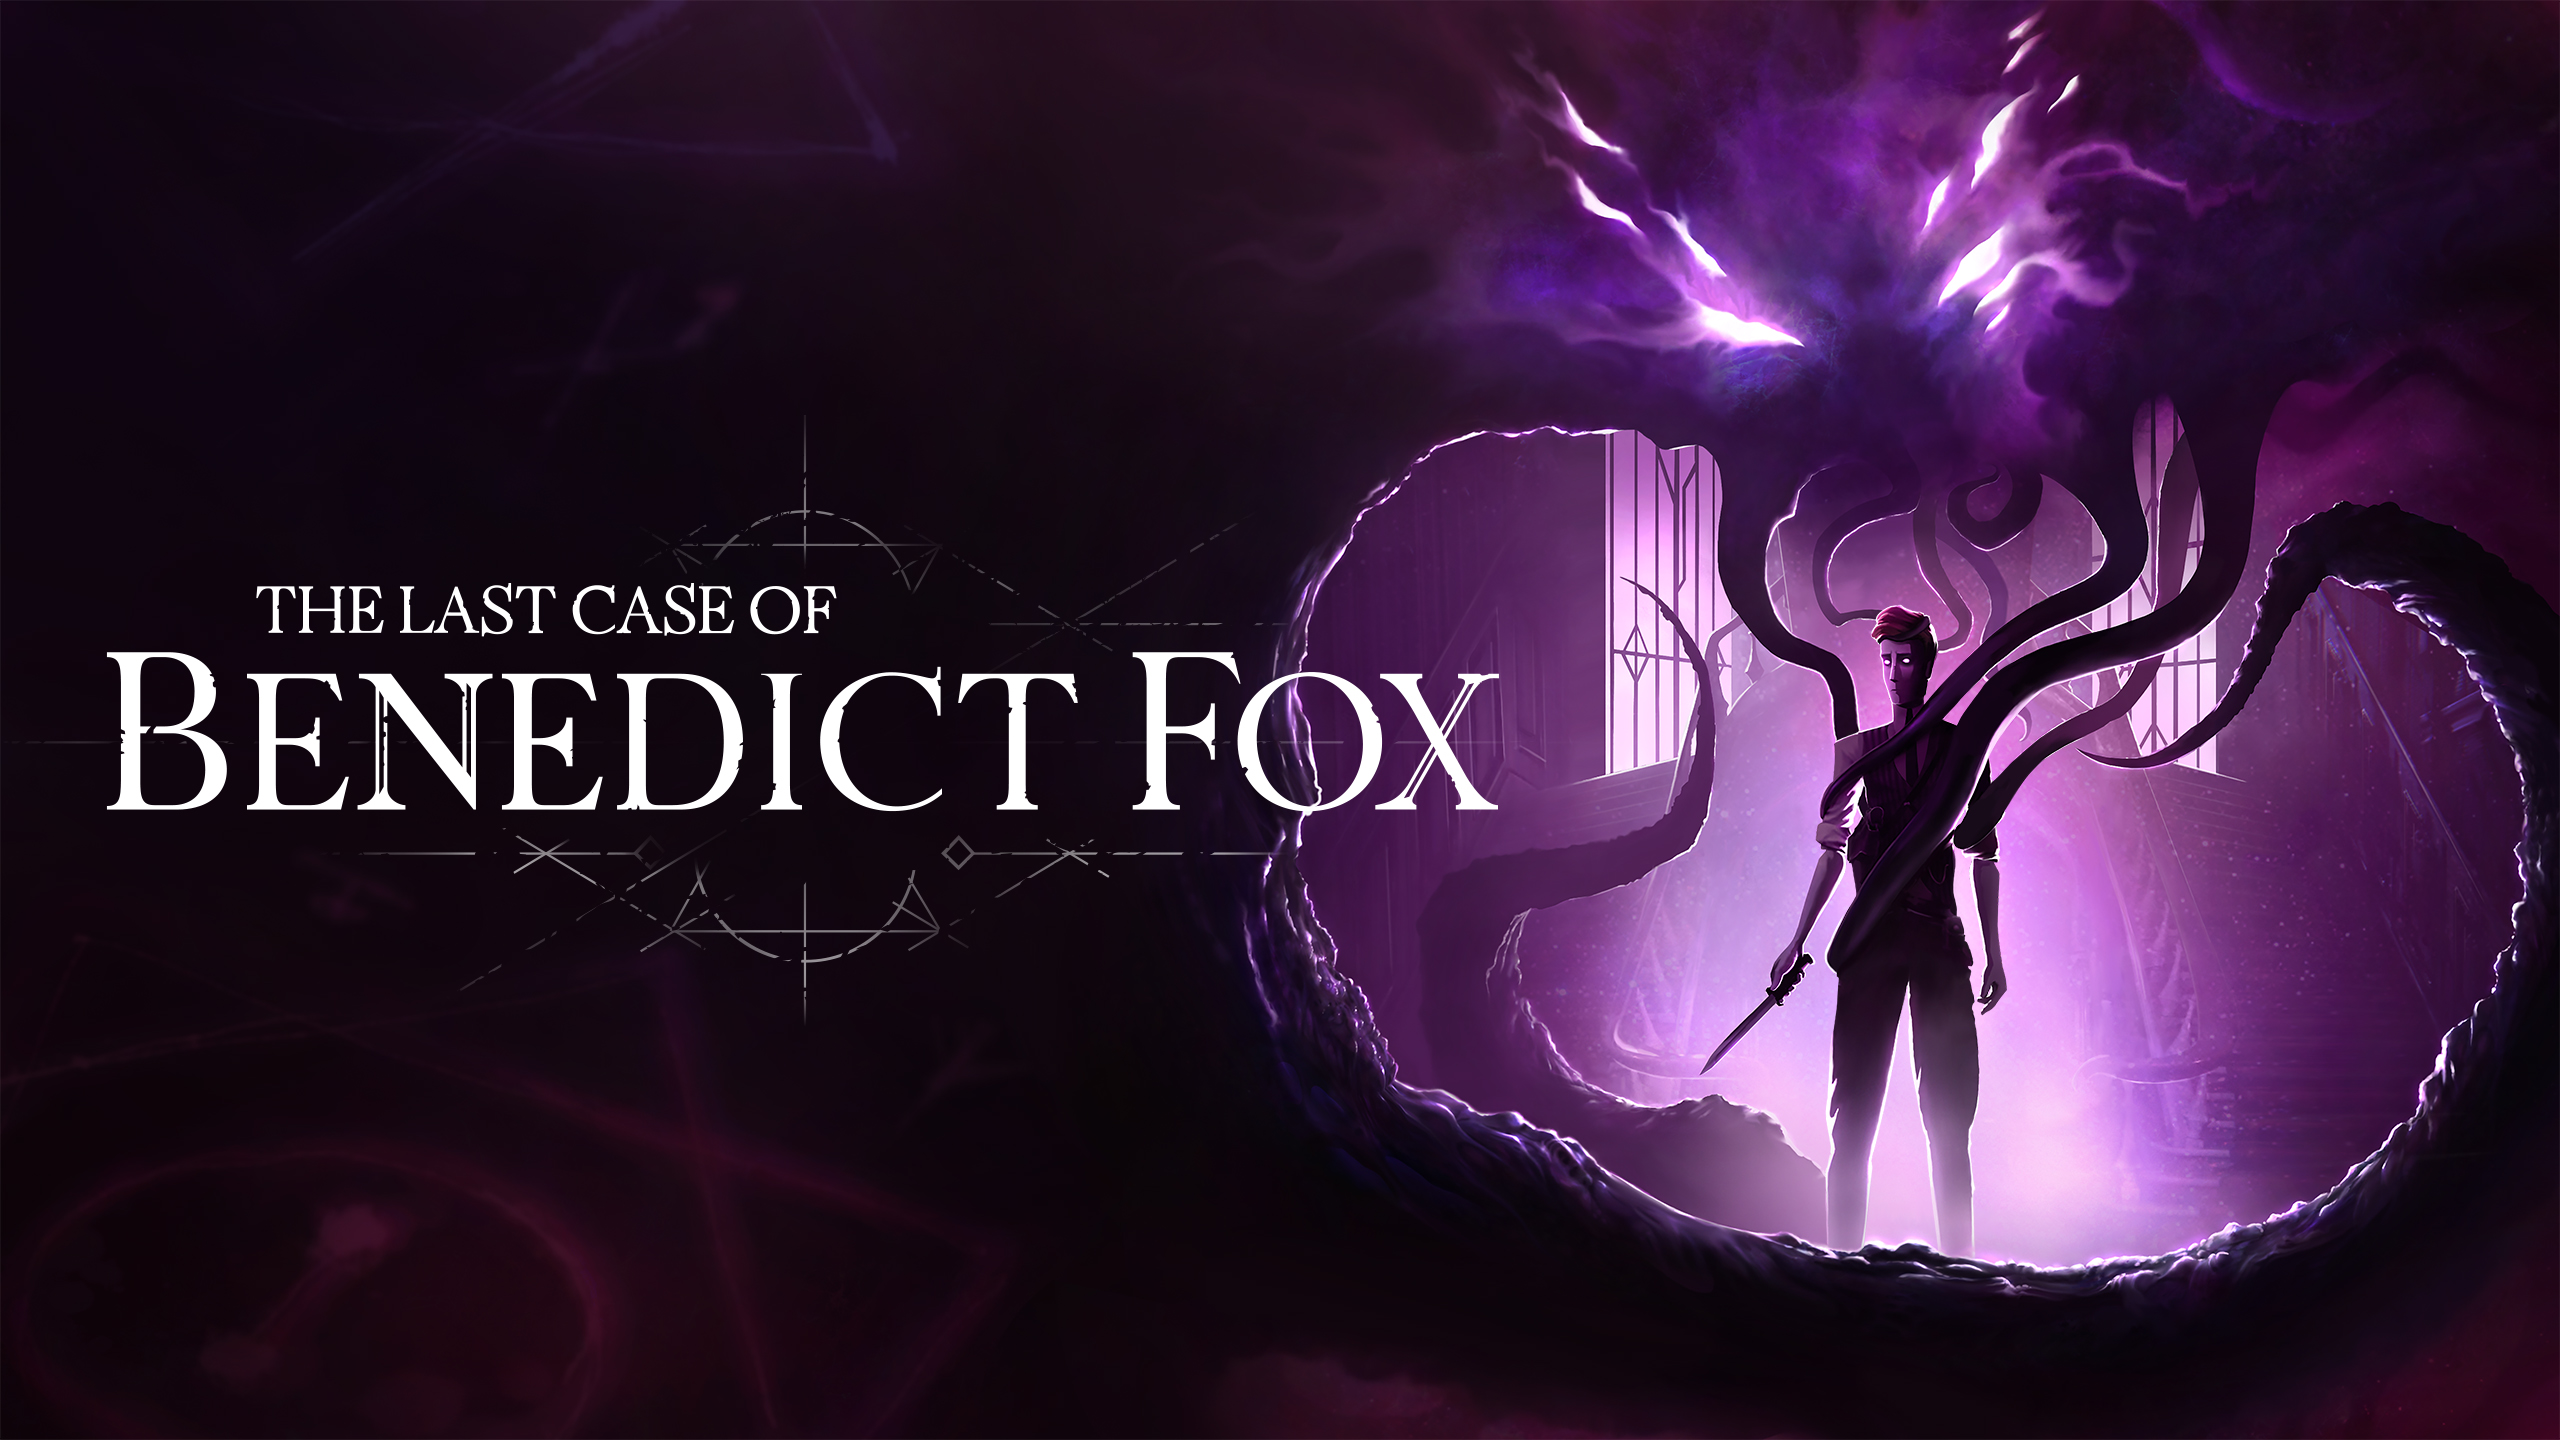 The key art for The Last Case of Benedict Fox.